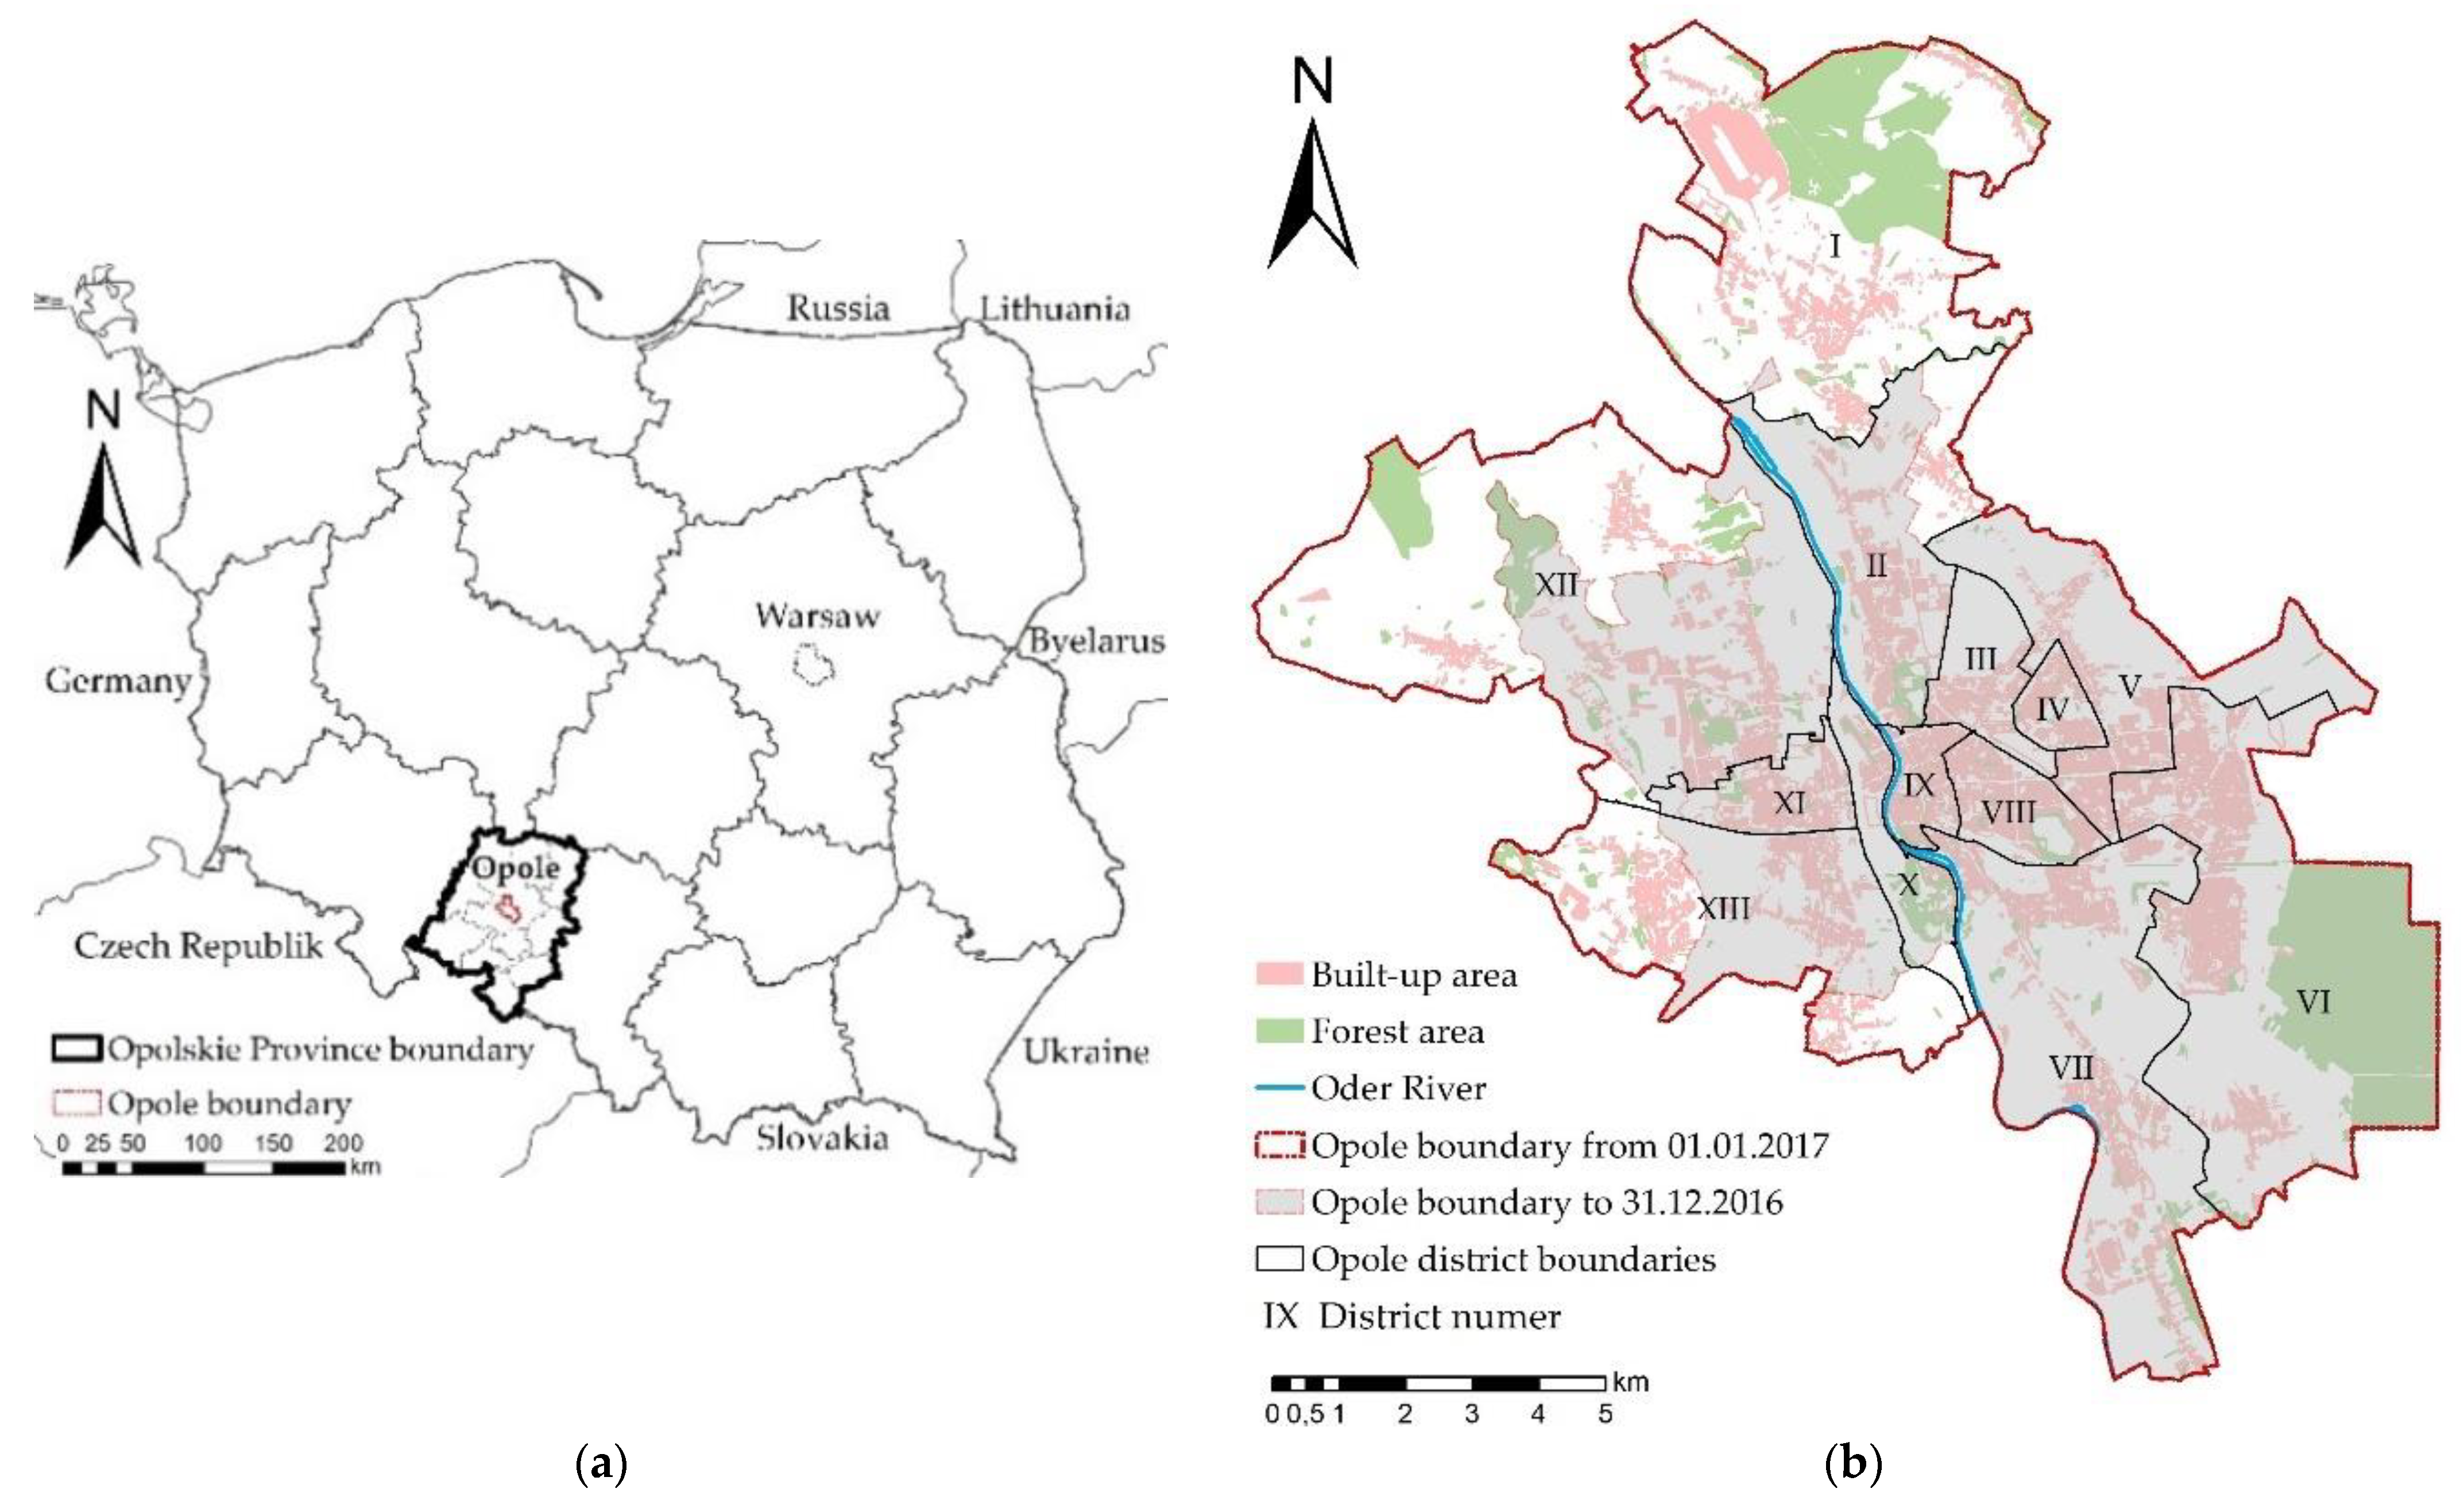 Geosciences | Free Full-Text | Spatial-Temporal Land Use and Land Cover  Changes in Urban Areas Using Remote Sensing Images and GIS Analysis: The  Case Study of Opole, Poland | HTML